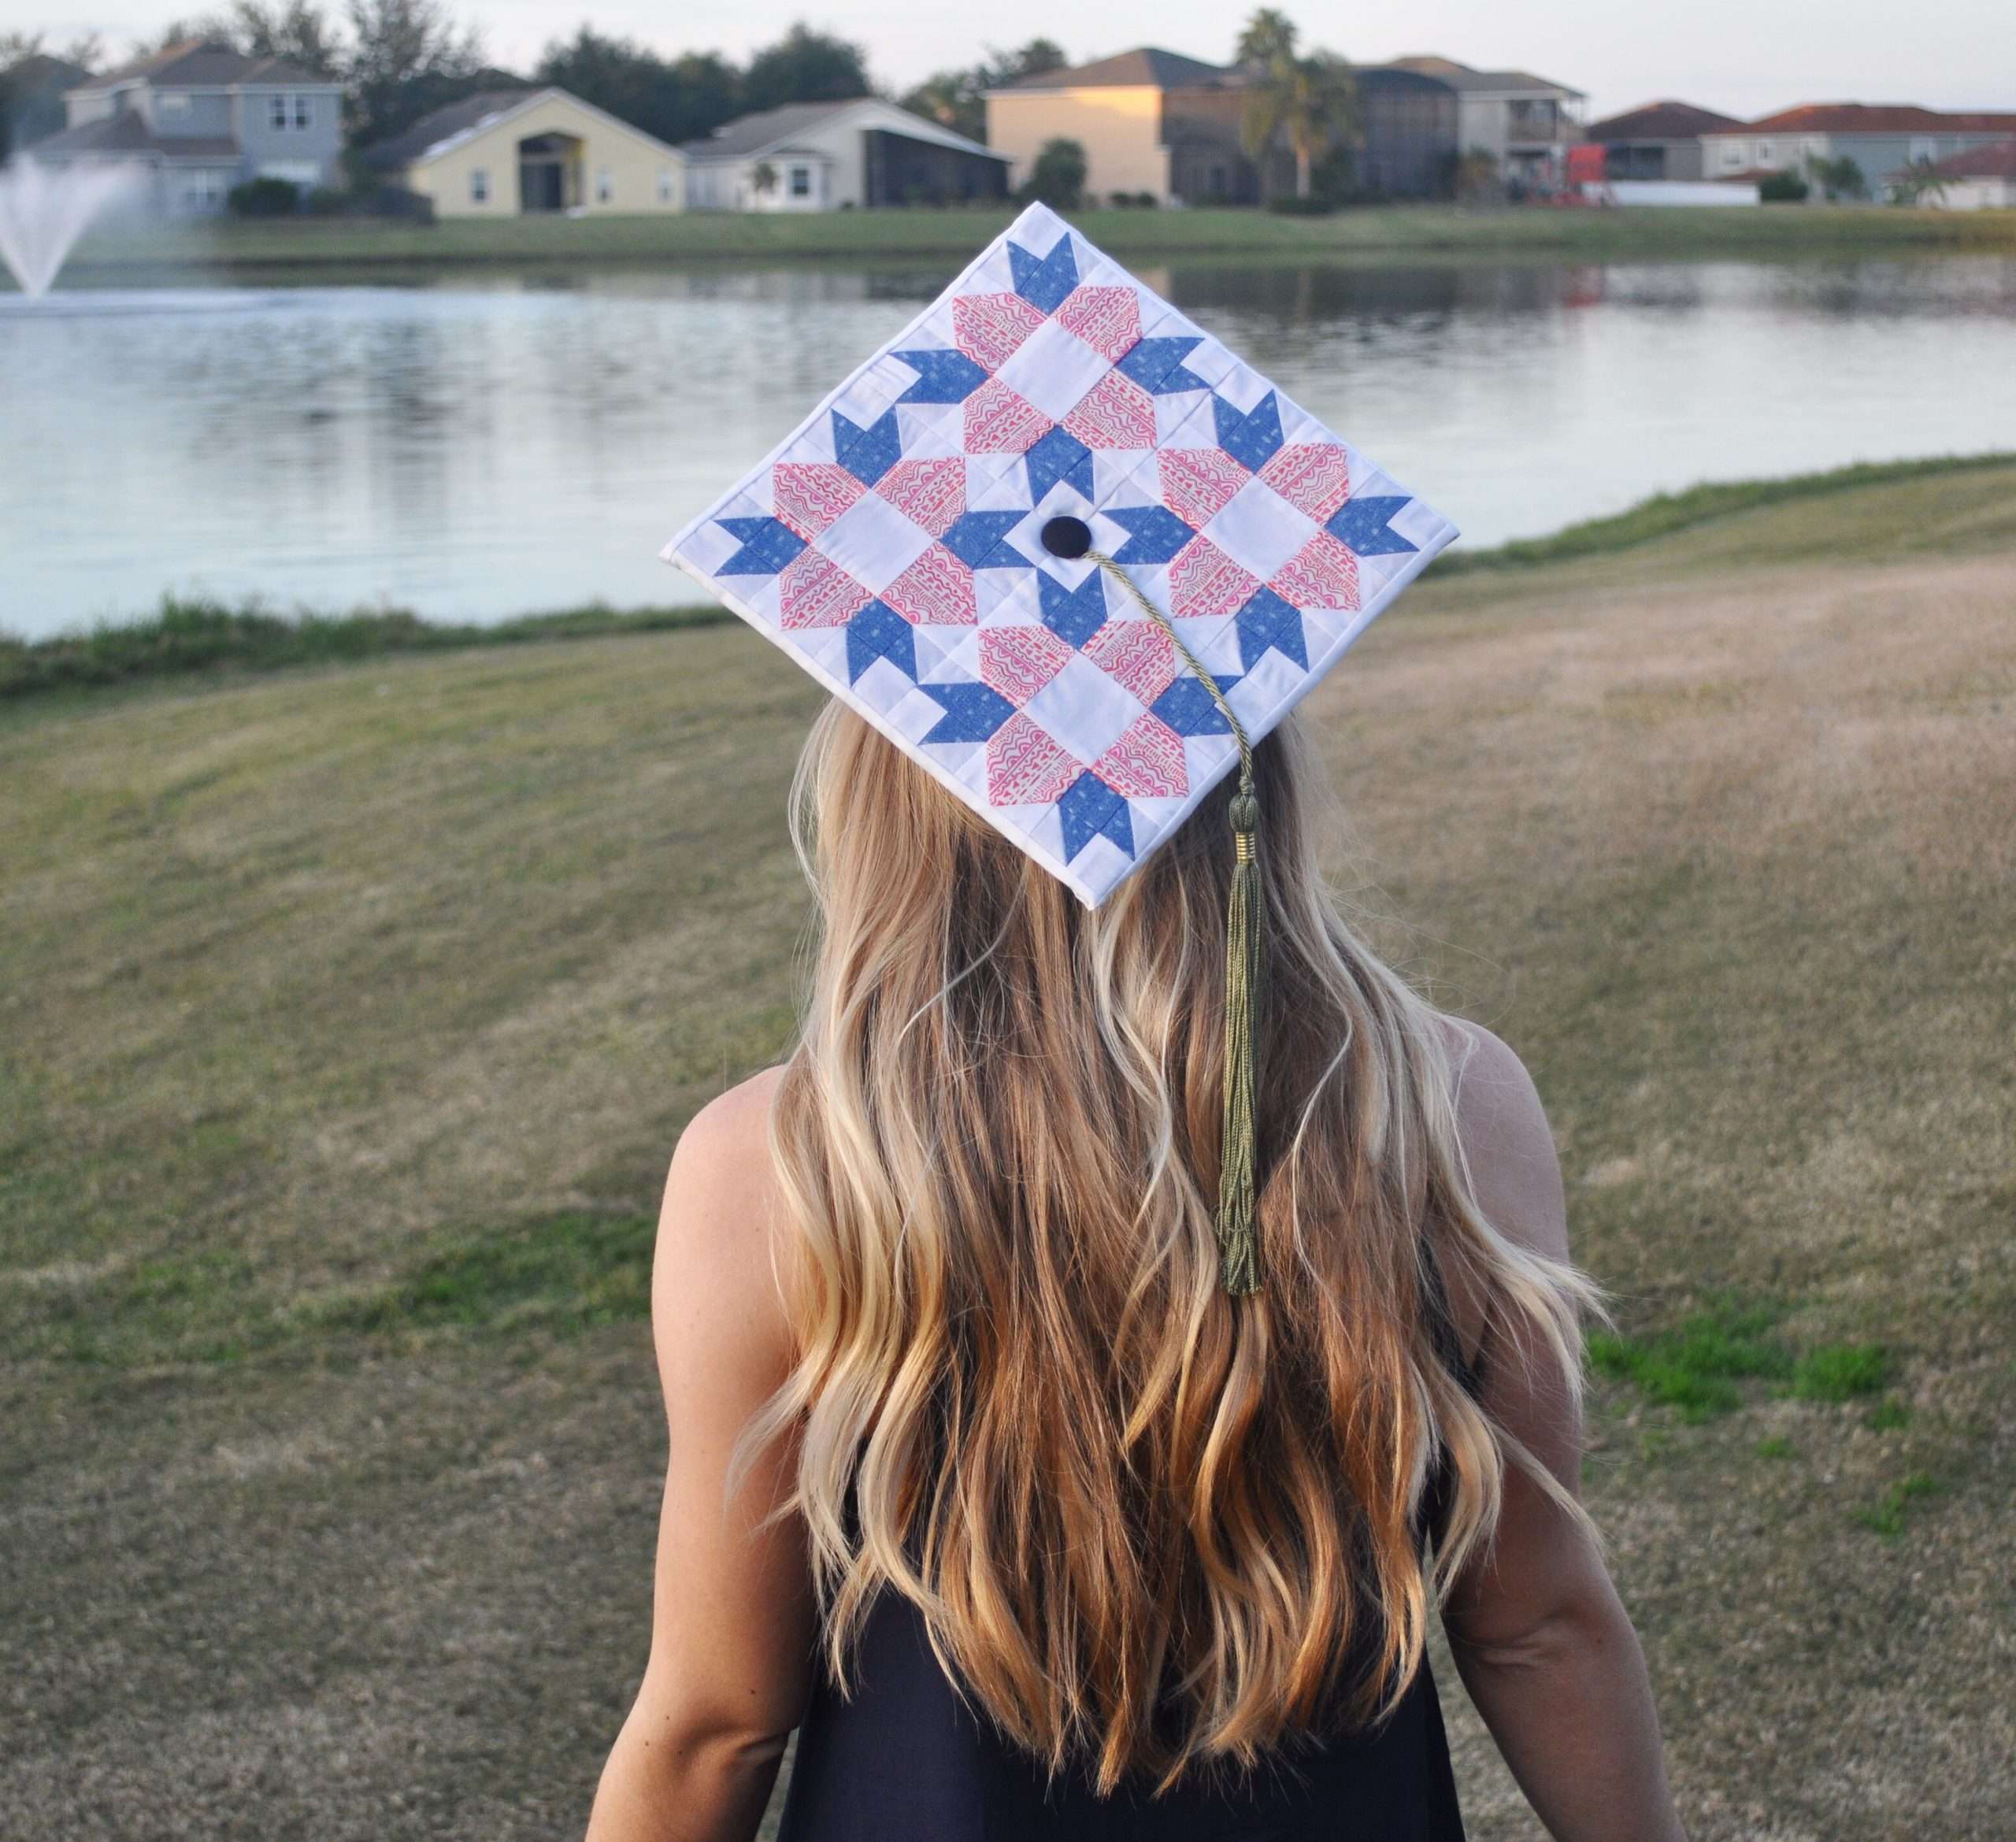 How to make a Quilted Graduation Cap